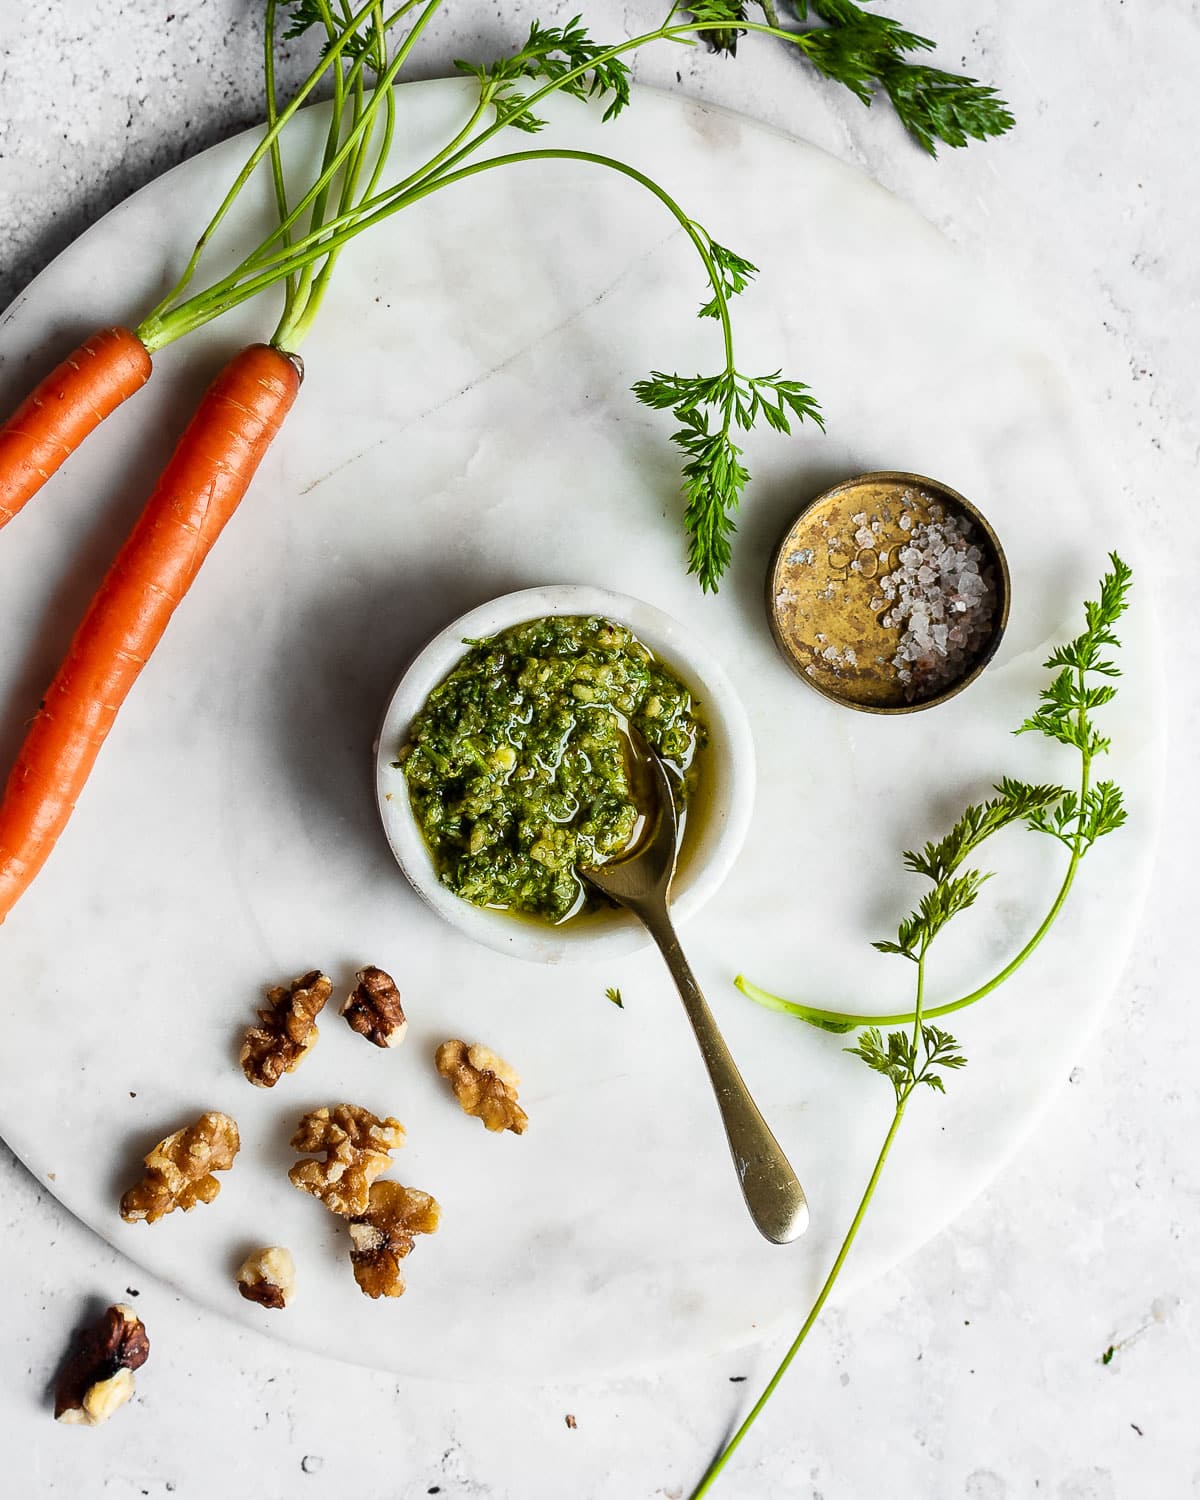 Carrot top pesto in a white marble bowl on white surface with carrots